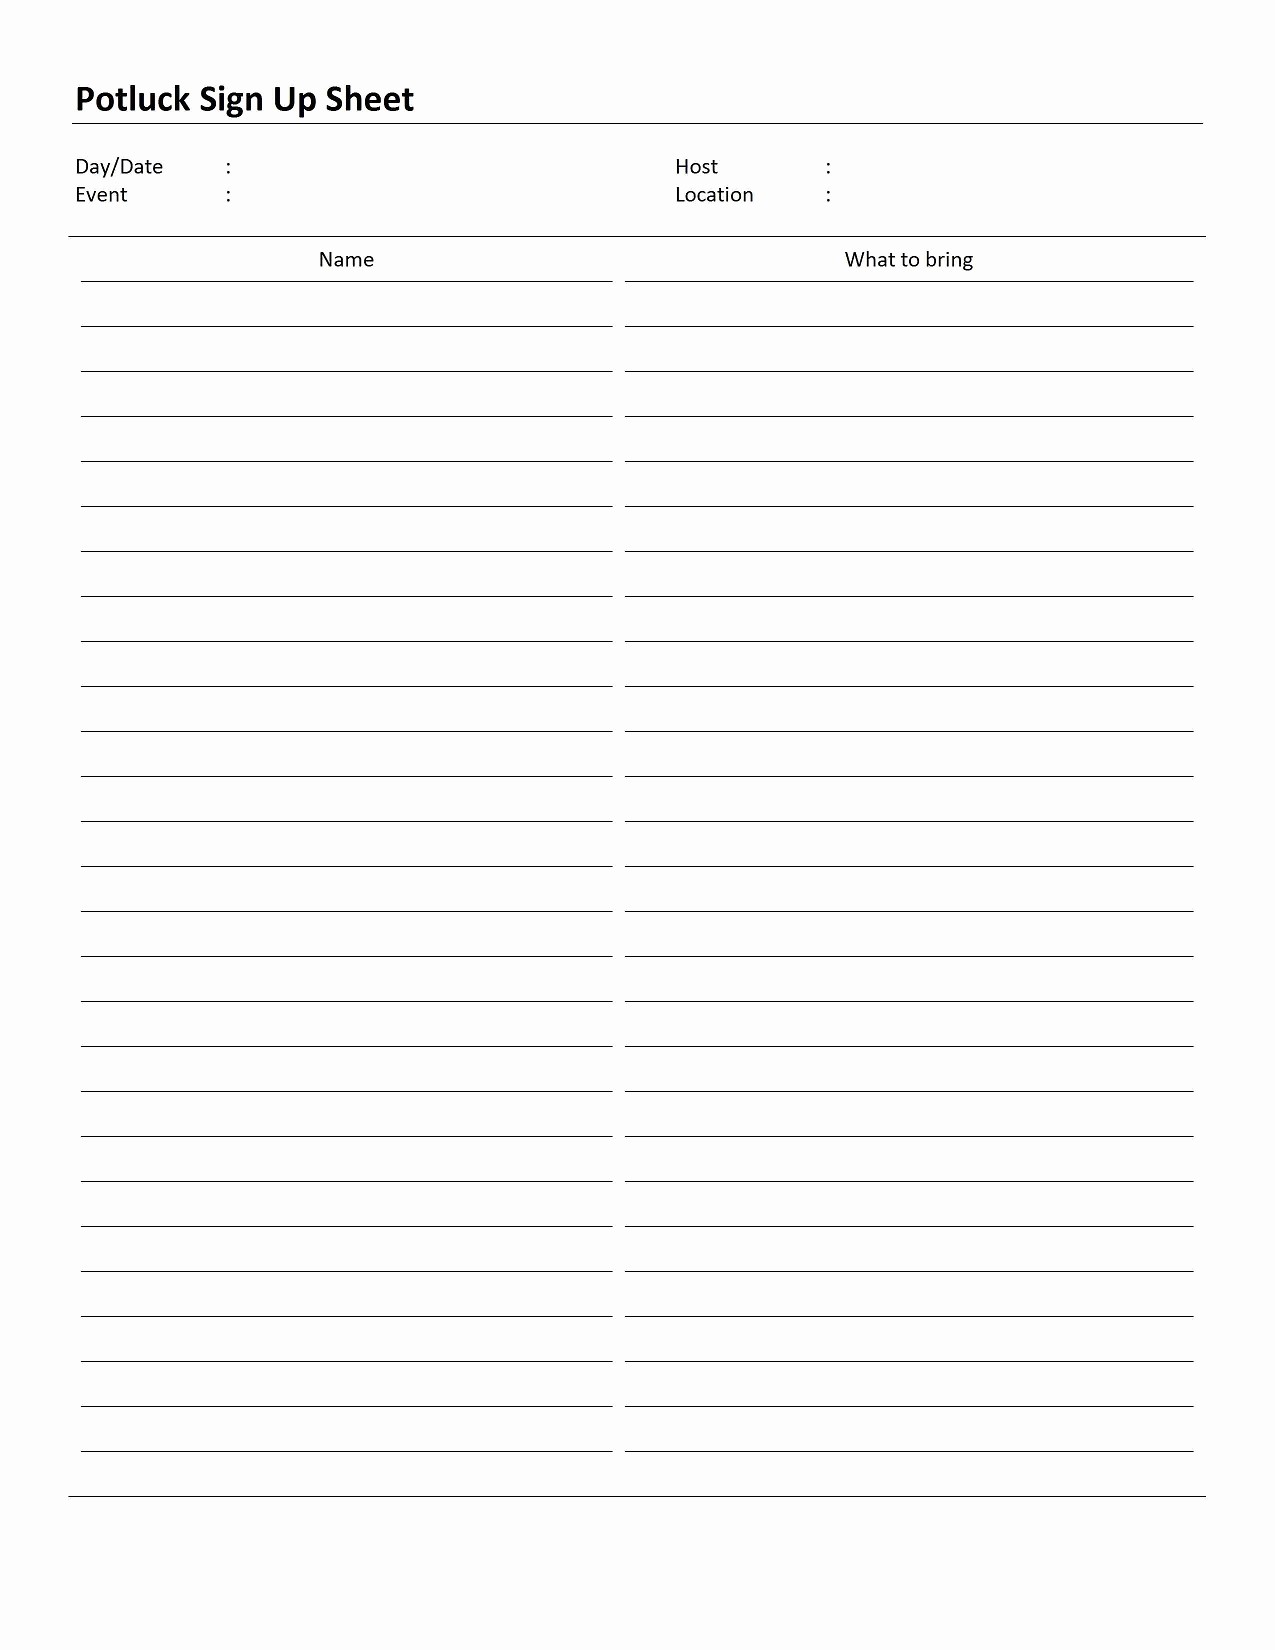 Blank Sign Up Sheet Template New Potluck Dinner Sign Up Sheet Printable